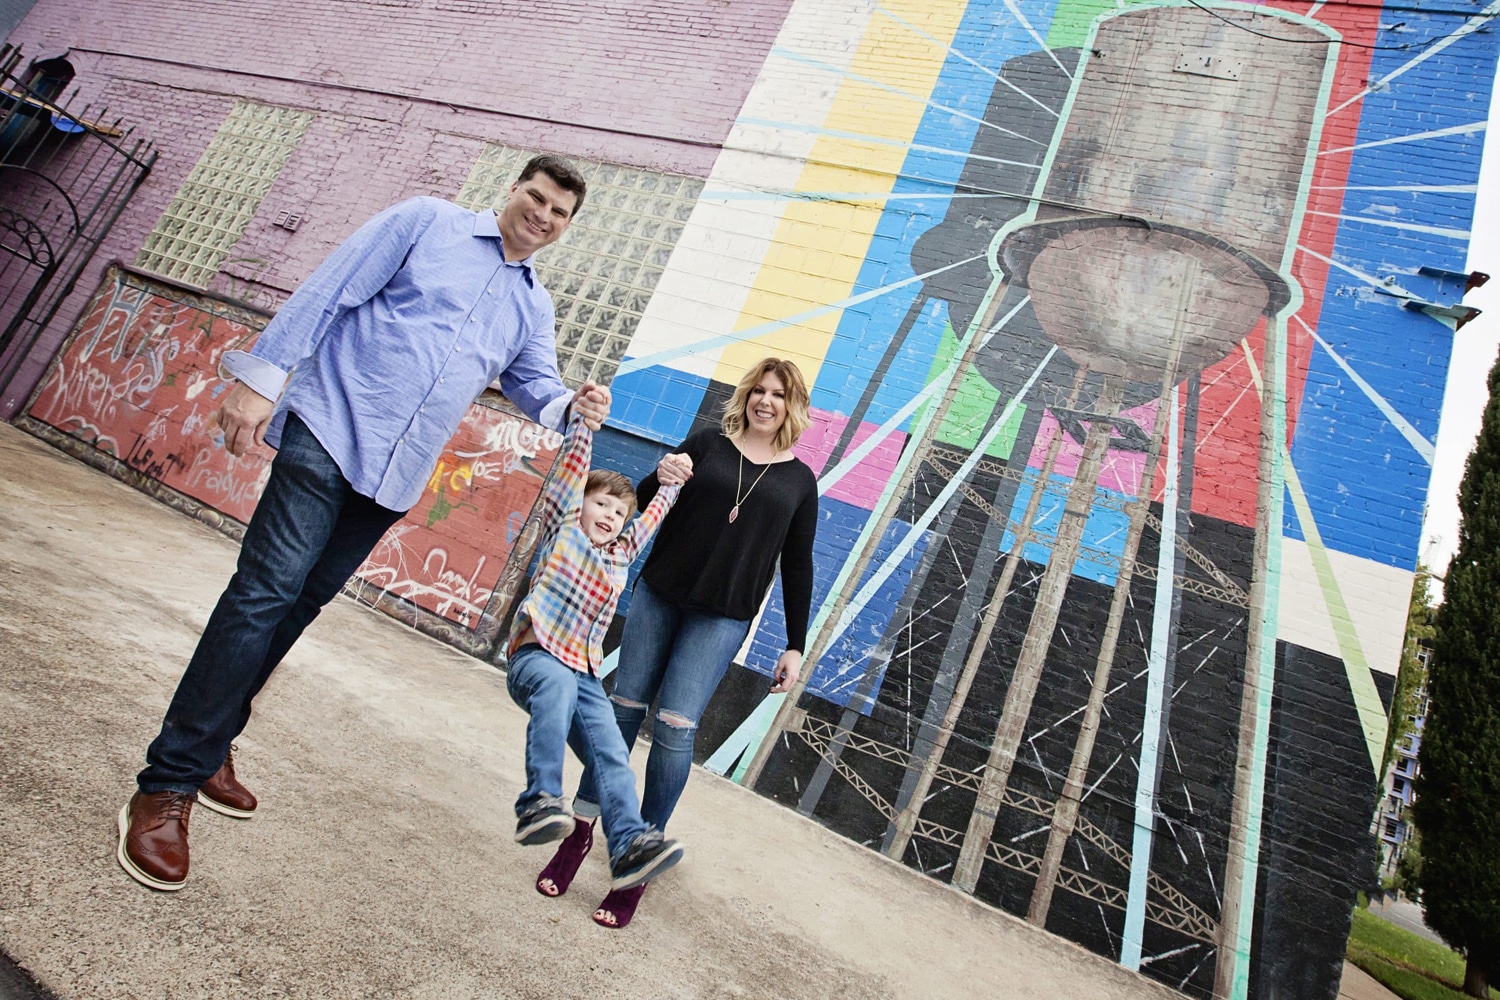 A family takes a photo in front of a mural.